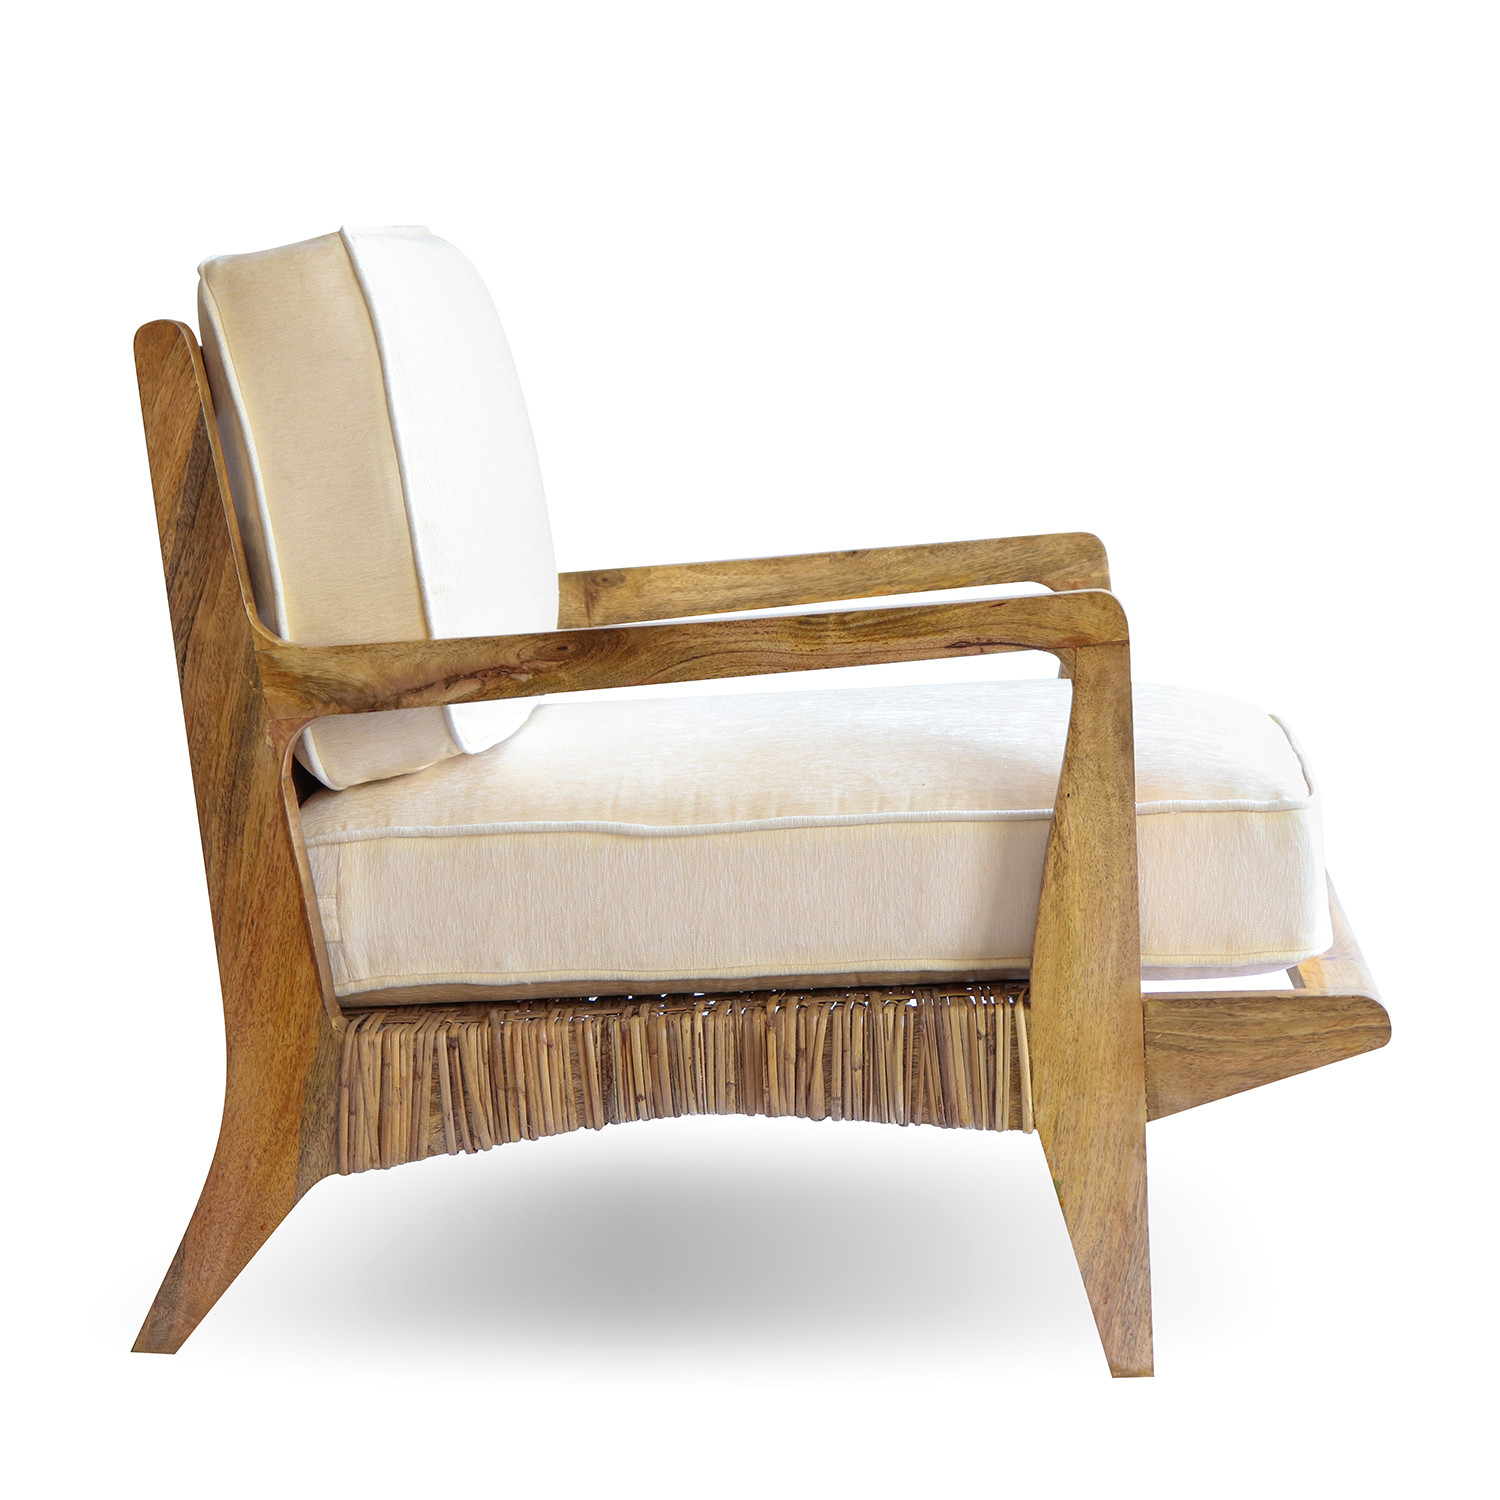 Rattan Accent Chair // Set of 2 Peach & Pebble Touch